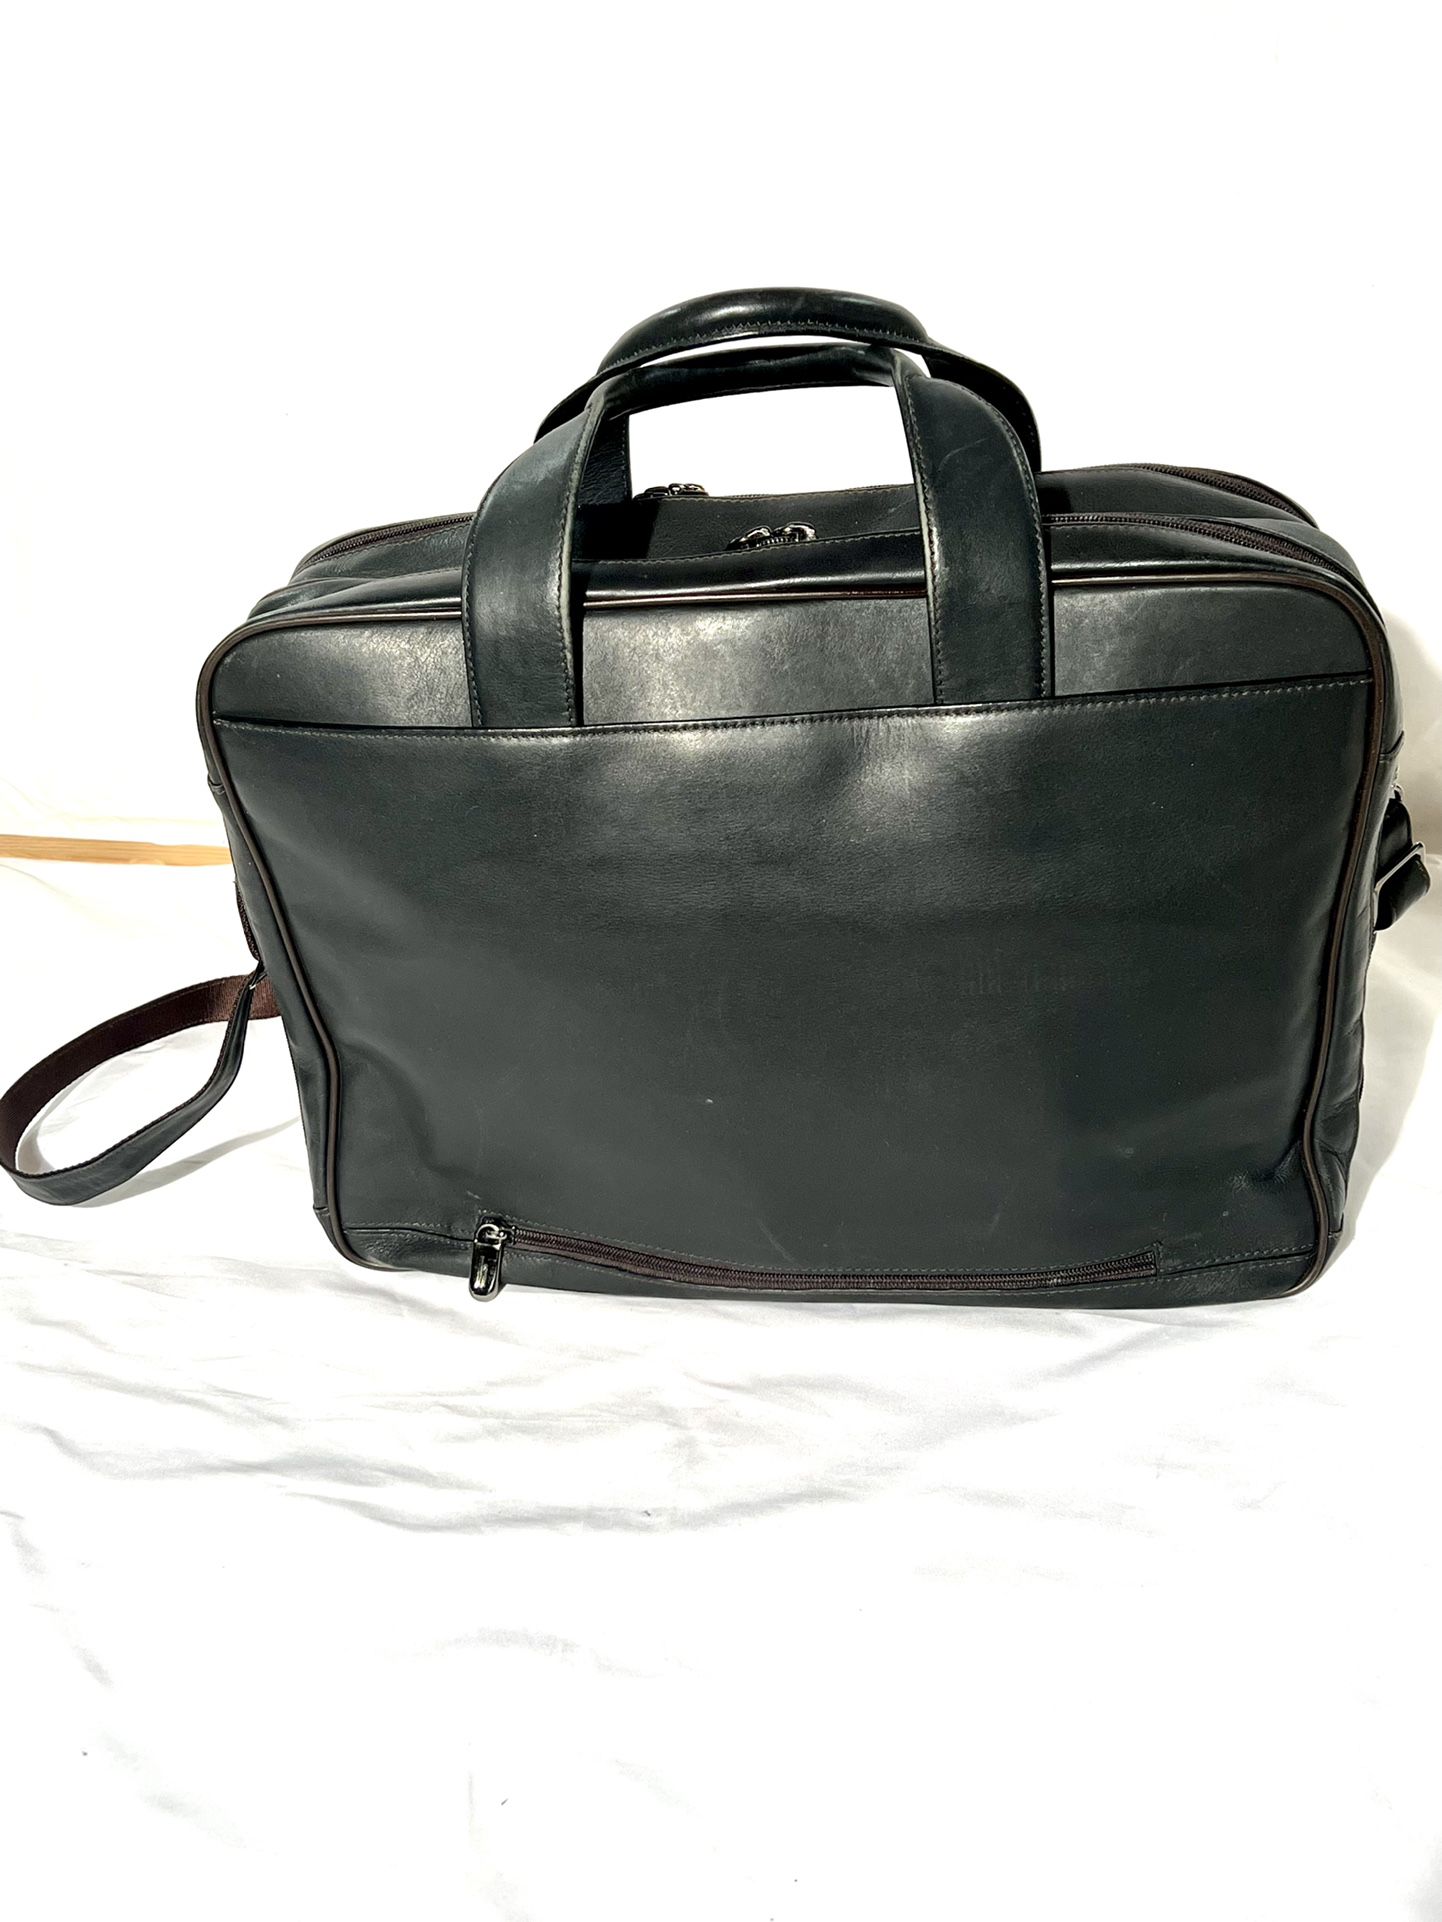 Hartmann Belting Leather Double Gusset Flapover Messenger Bag Briefcase  Attache. for Sale in Los Angeles, CA - OfferUp